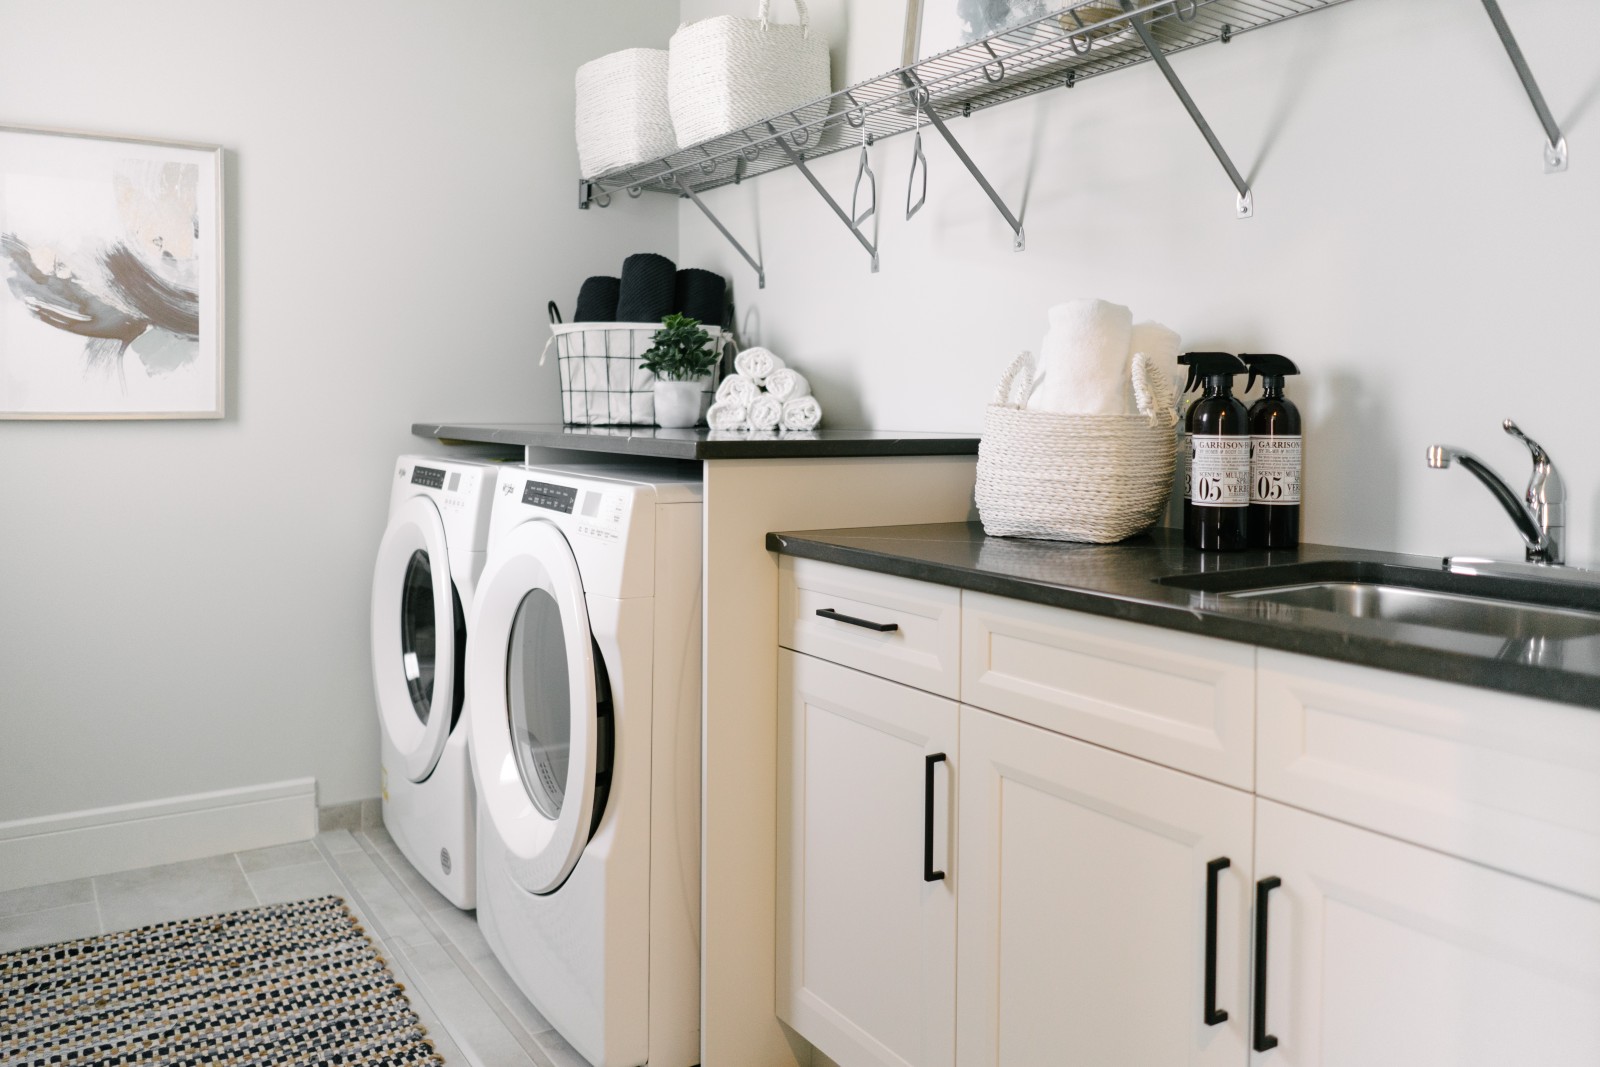 Bright laundry room of the Cassius showhome with countertop over appliances and built in white cabinets with laundry sink